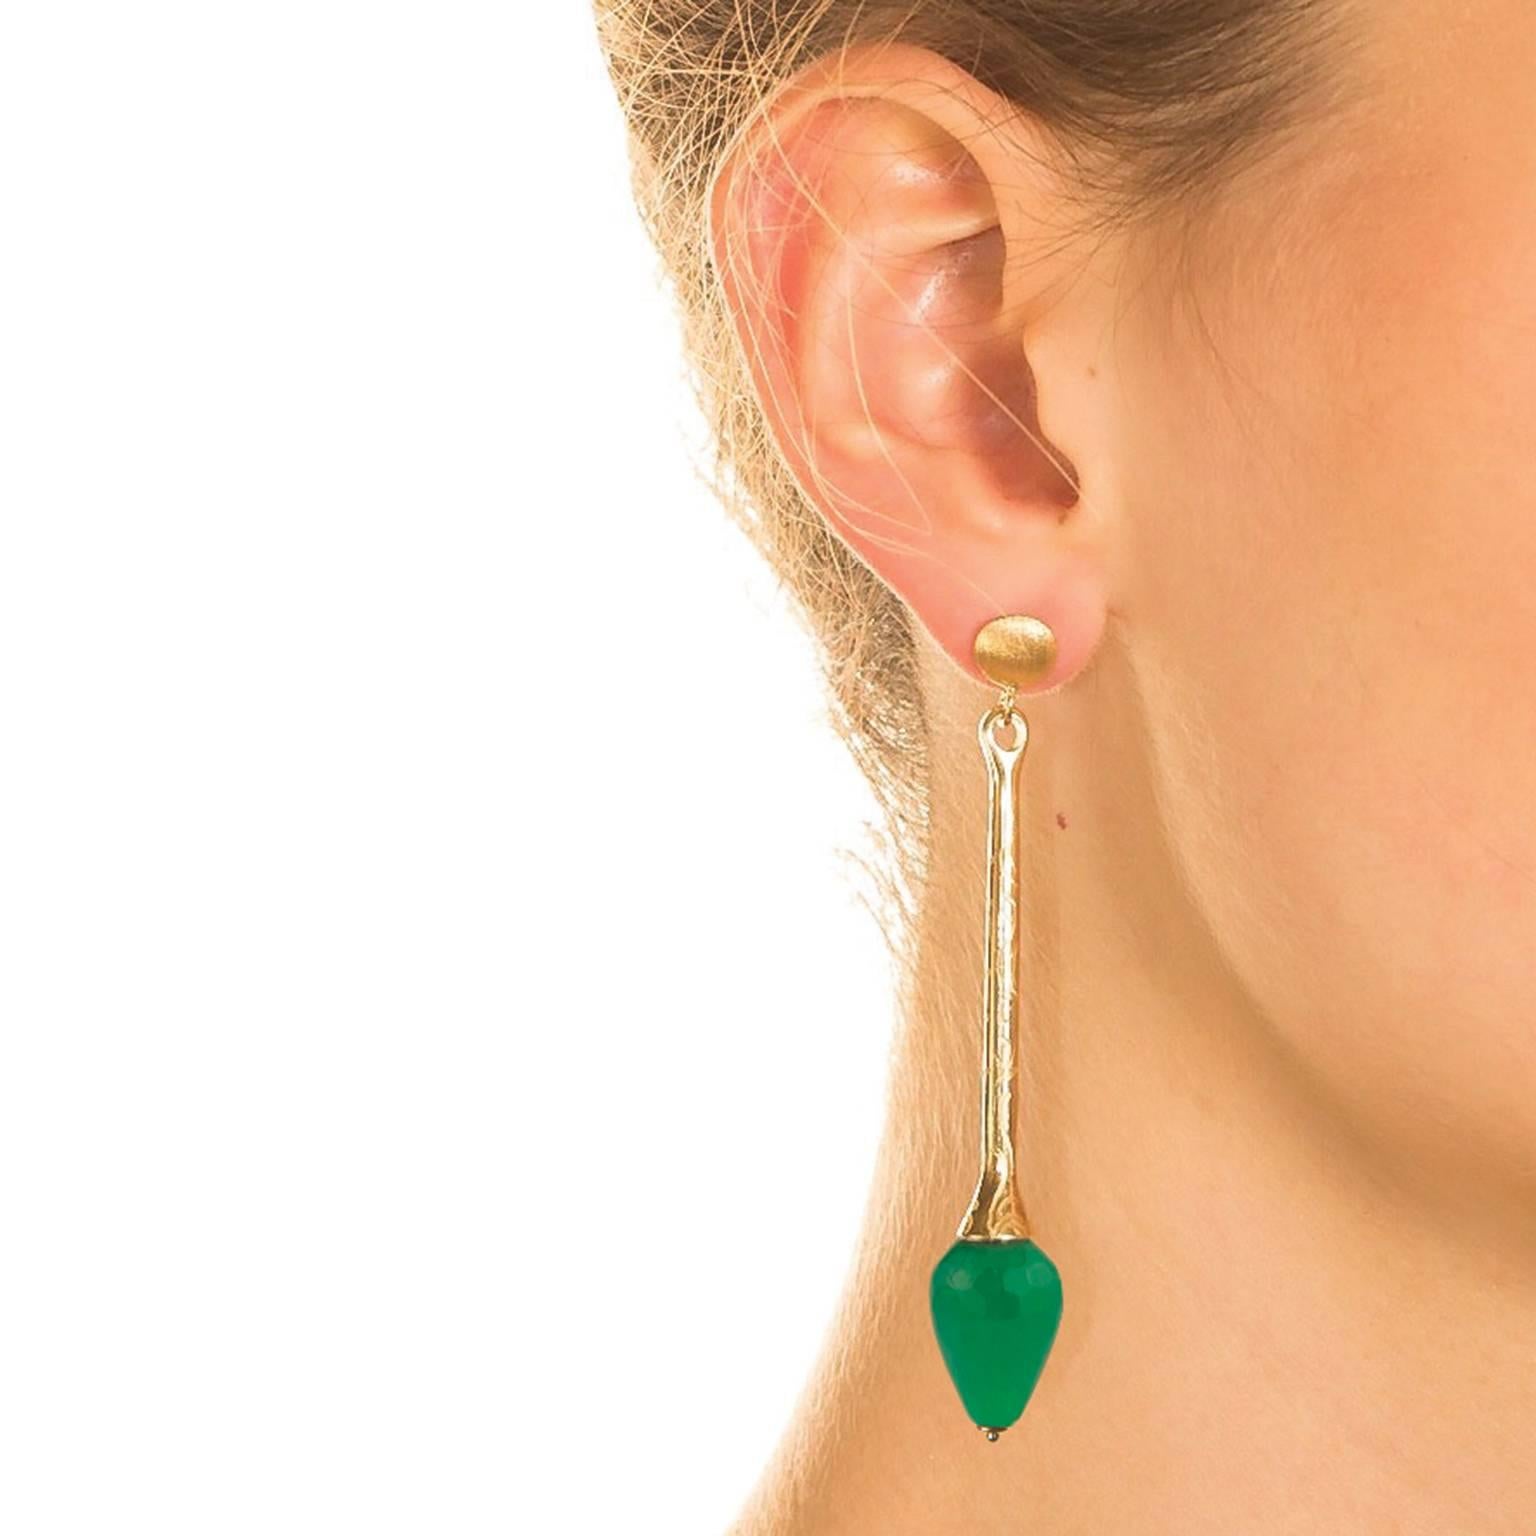 A magic wand of 18 karat yellow gold vermeil is topped with a sharply faceted spear-tip carved green Agate which flashes as it captures the light.  The piercing is 18 karat yellow gold.  Go ahead and make a wish !

Strikingly seductive, these